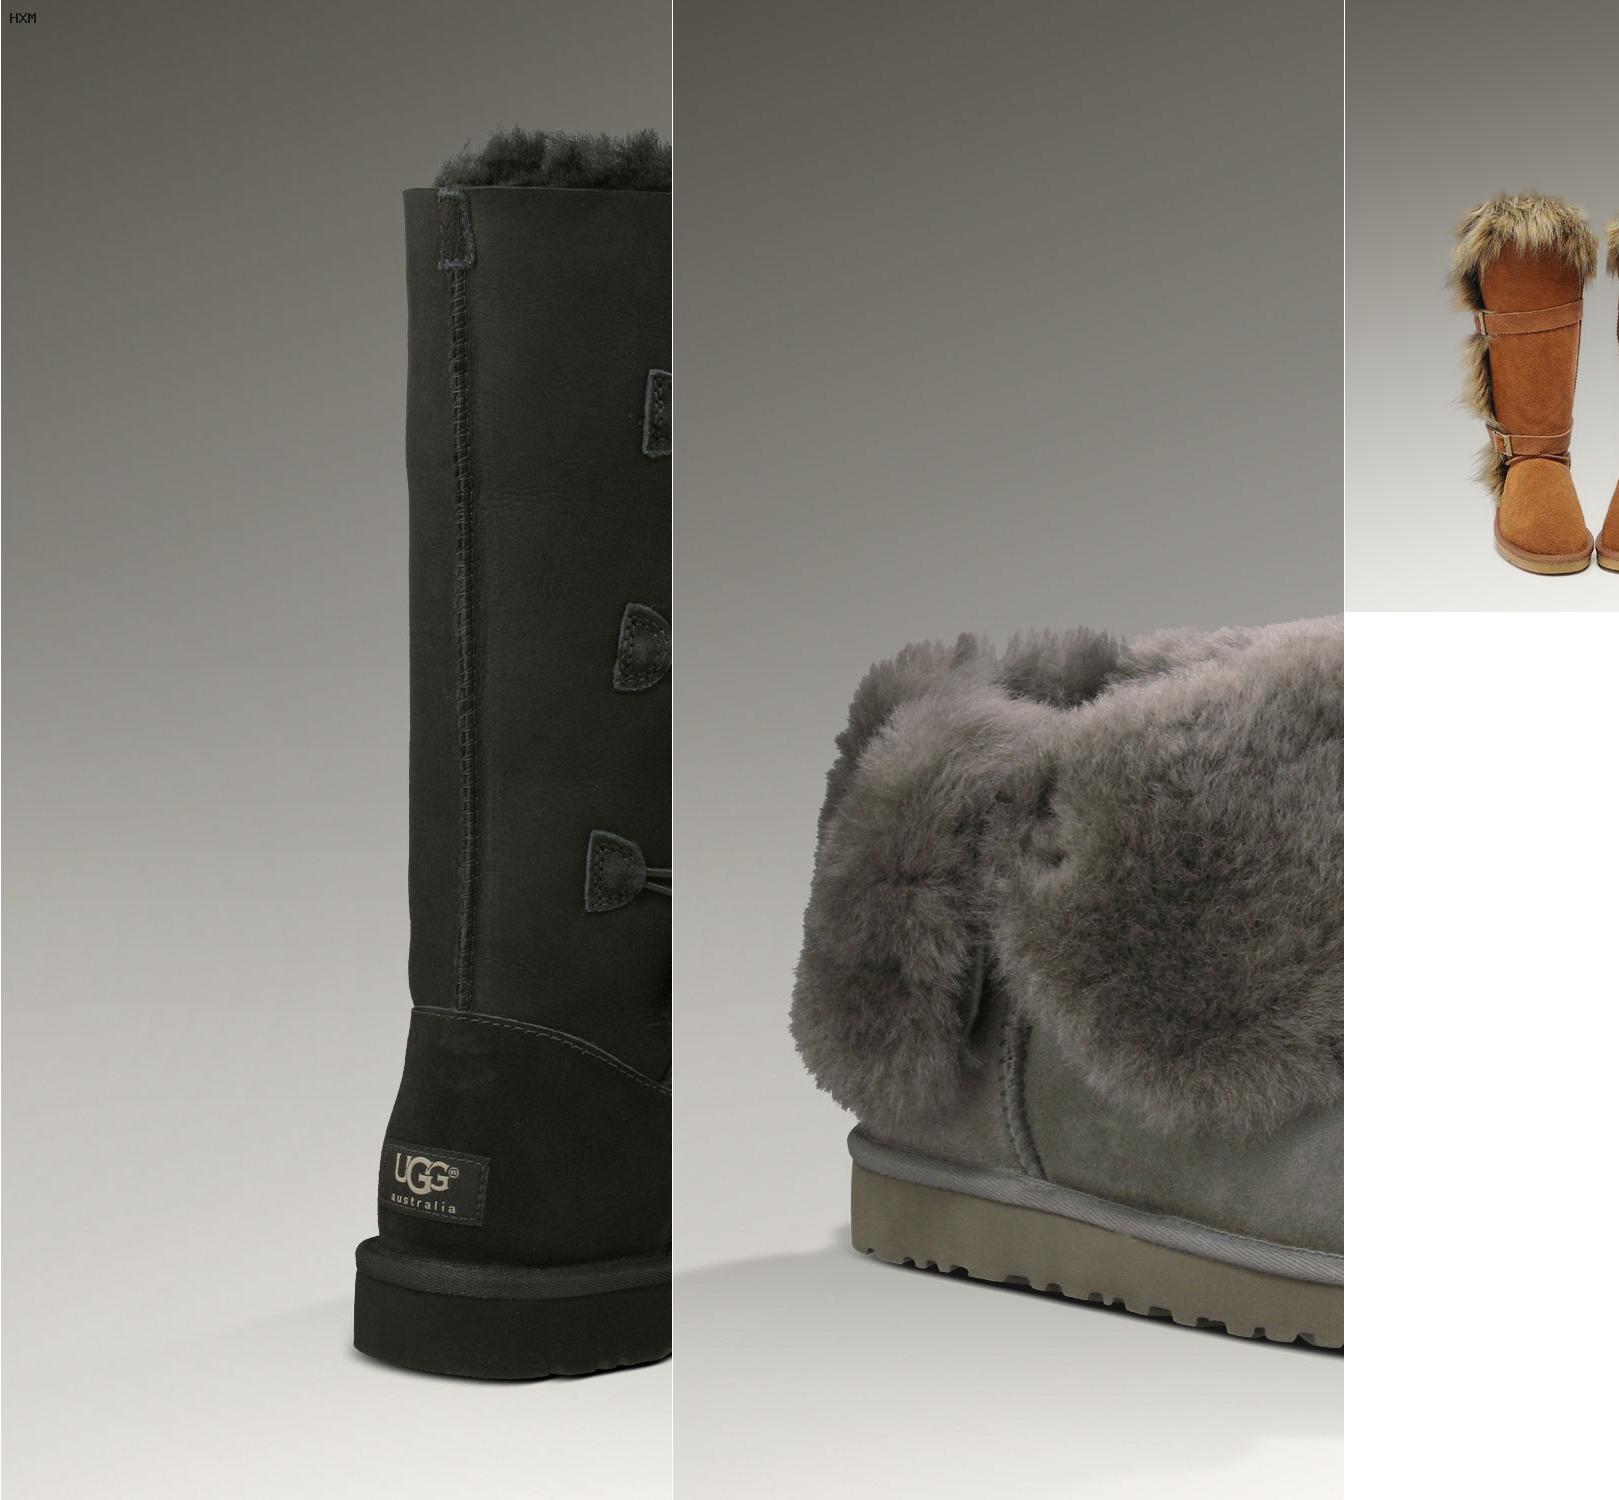 imitation ugg boots for toddlers